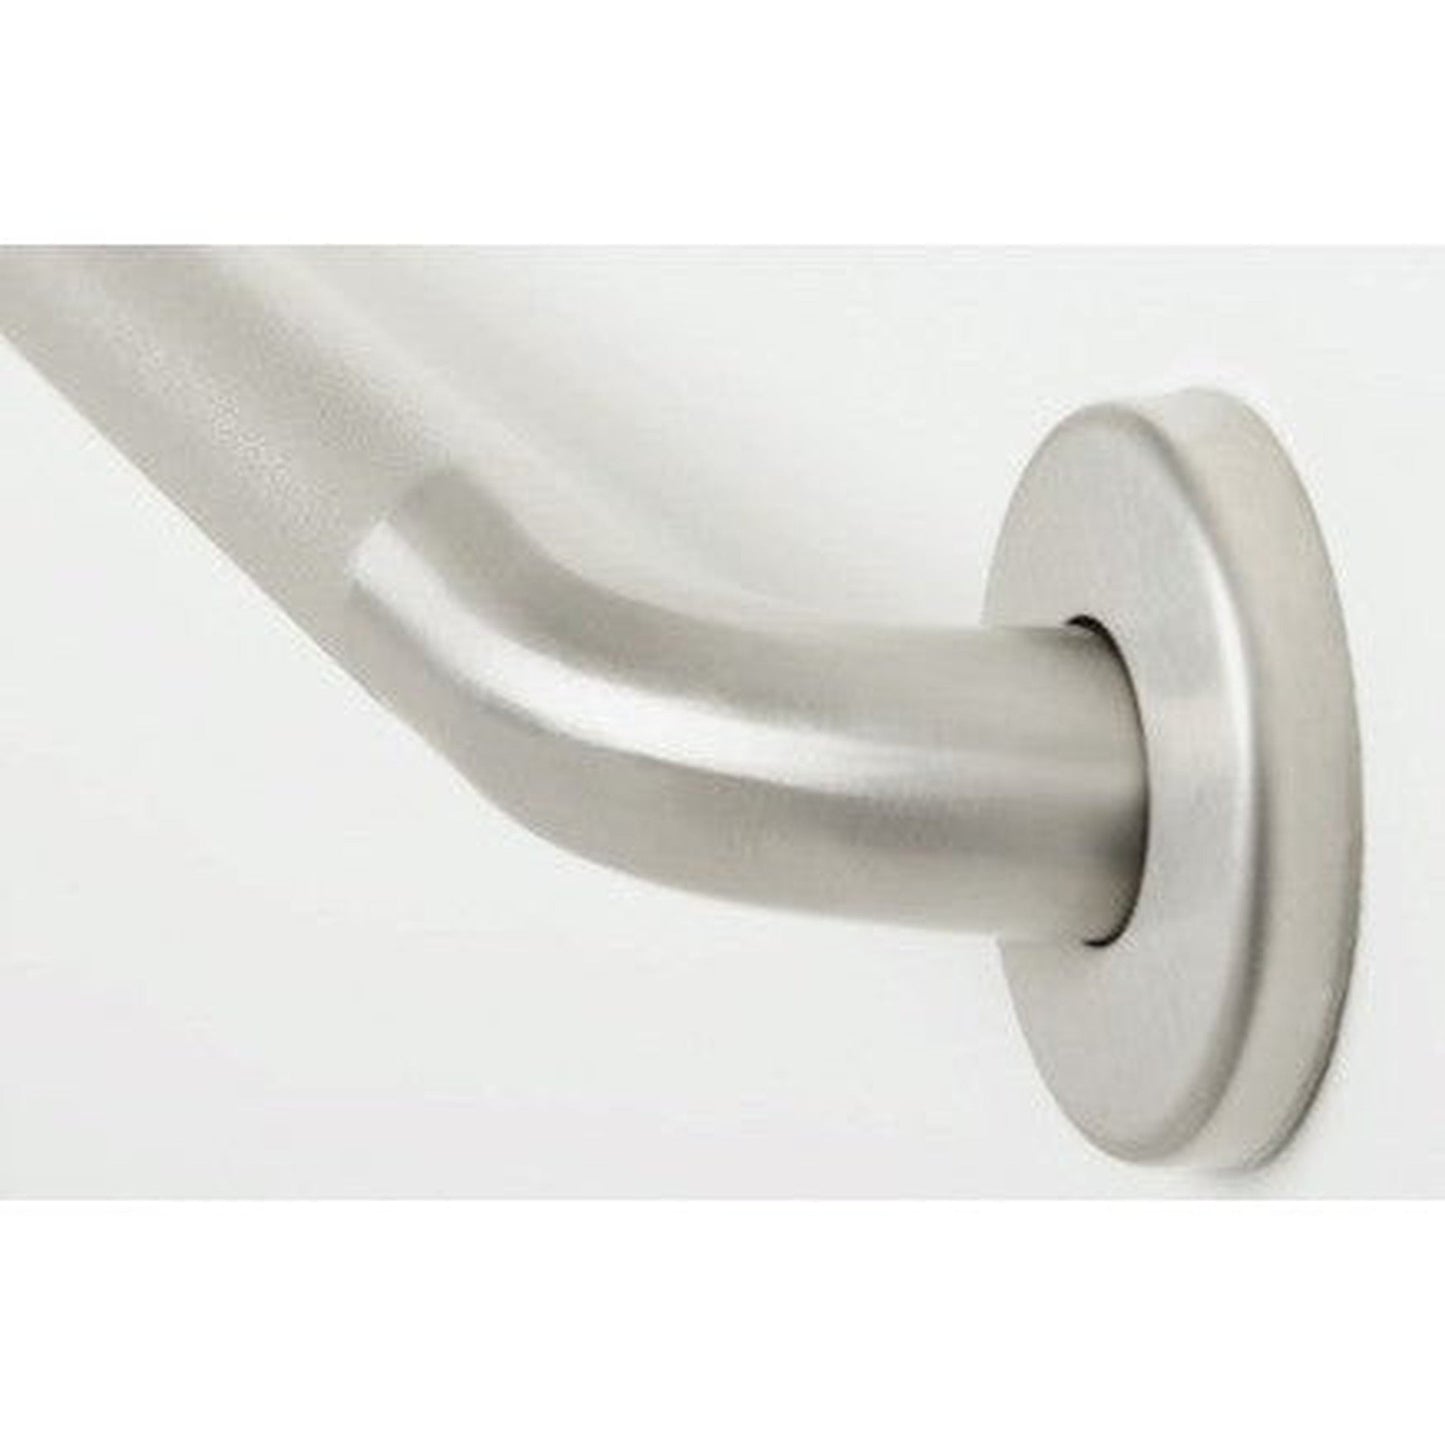 Seachrome Signature GY Series 16" Peened With Satin Stainless Steel Ends 1.25" Tube Diameter Straight Grab Bar